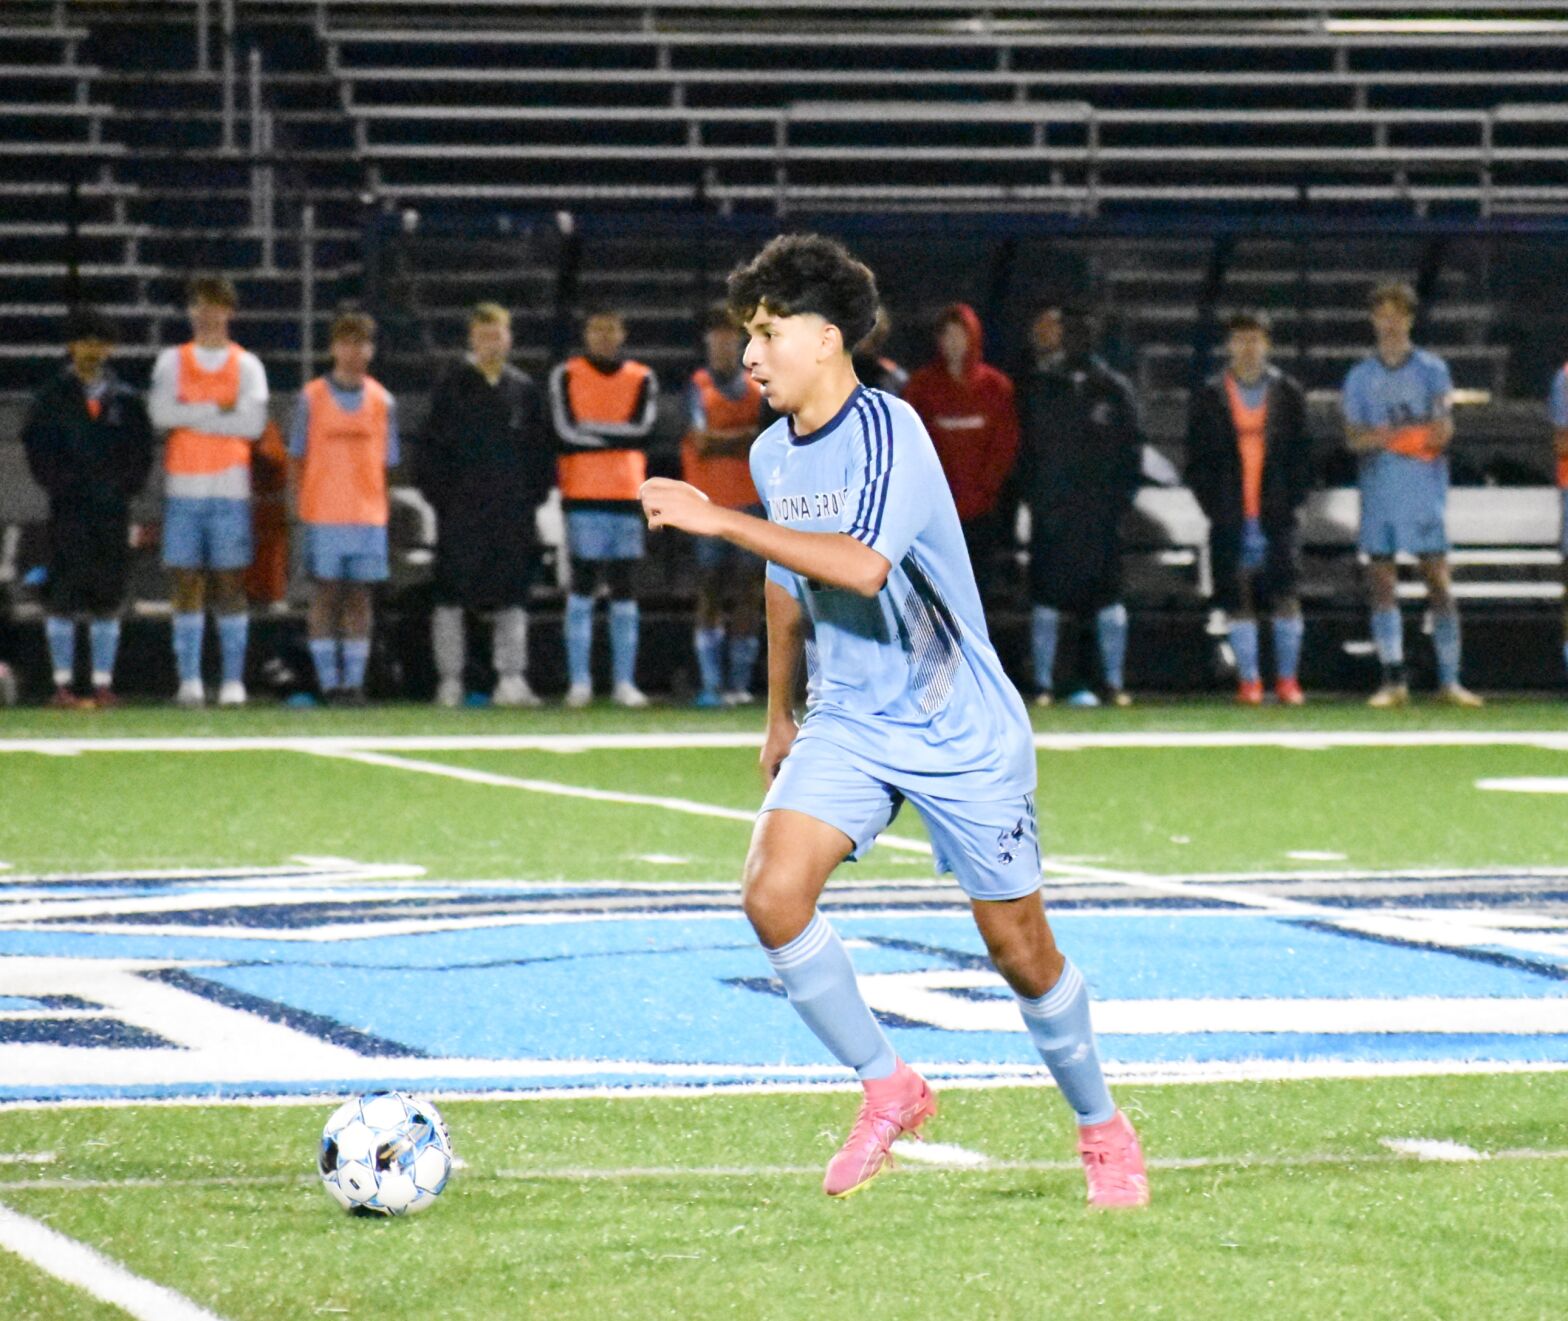 Monona Grove boys soccer comes-from-behind to advance in playoffs over Baraboo